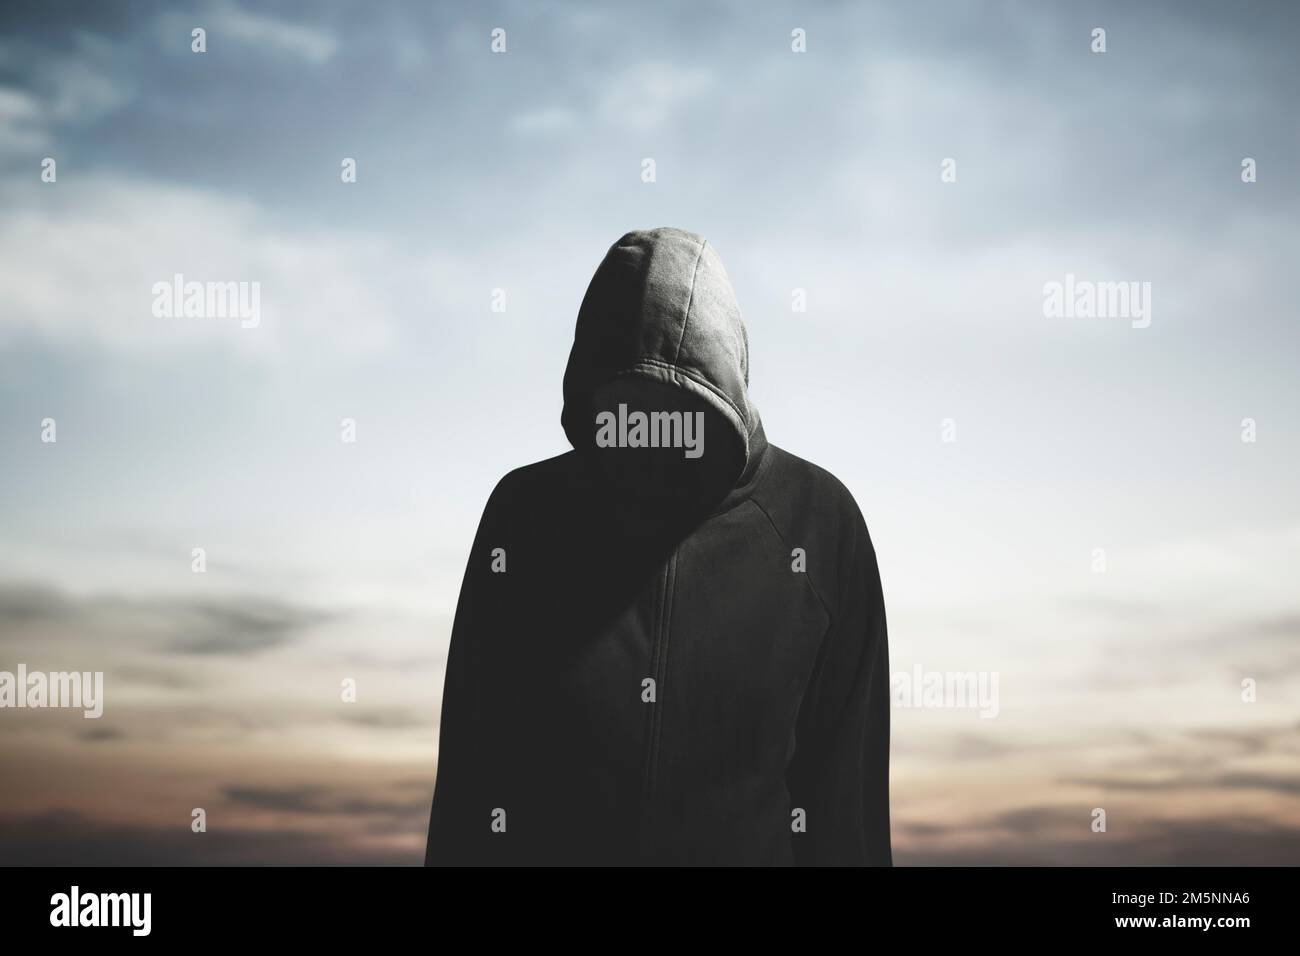 surreal man with hood and obscured face wanders aimlessly Stock Photo